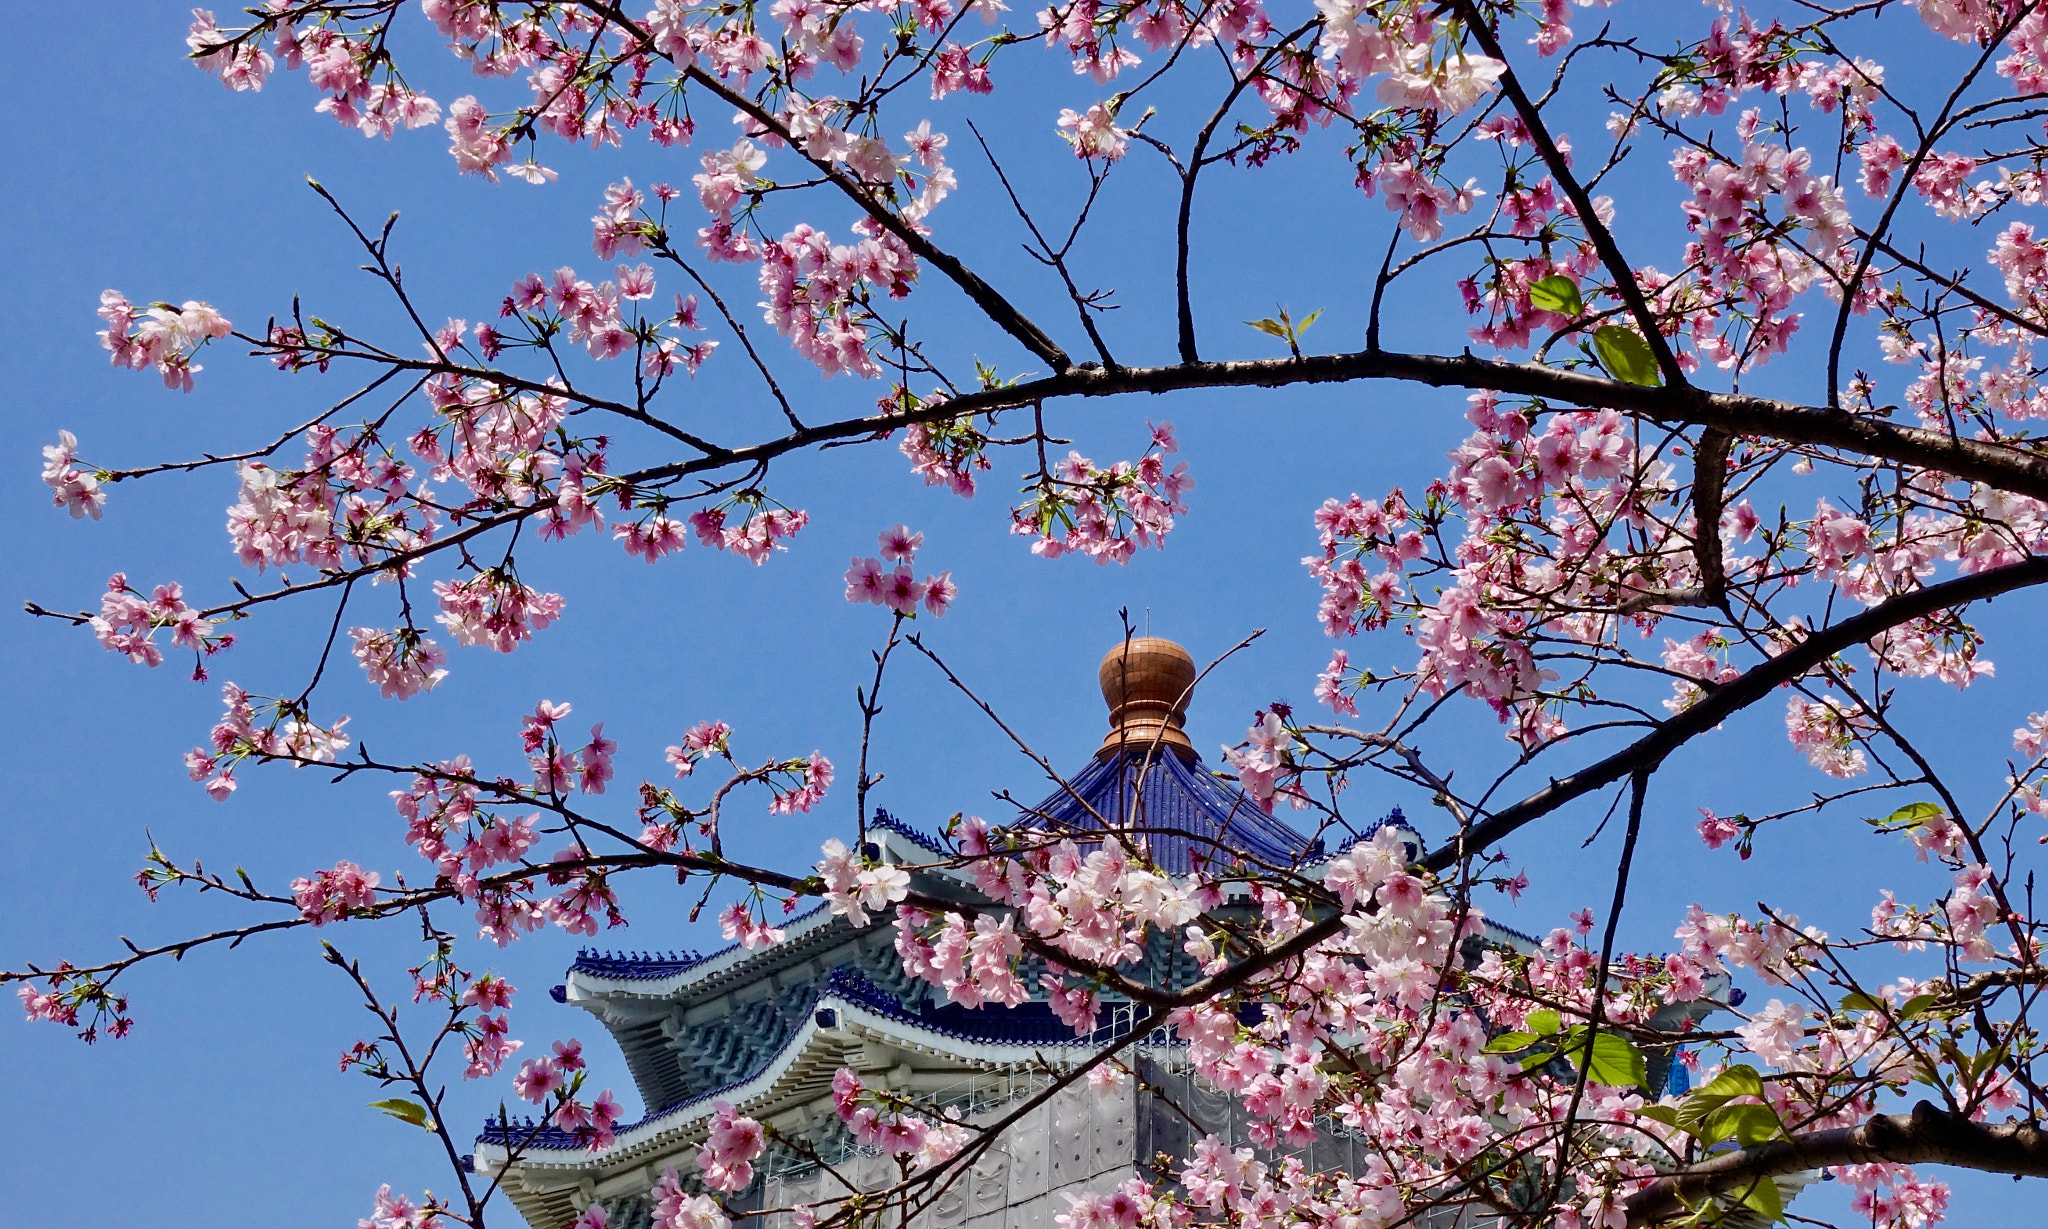 Sony DSC-RX100M5 sample photo. Cherry blossoms in chiang kai-shek memorial photography